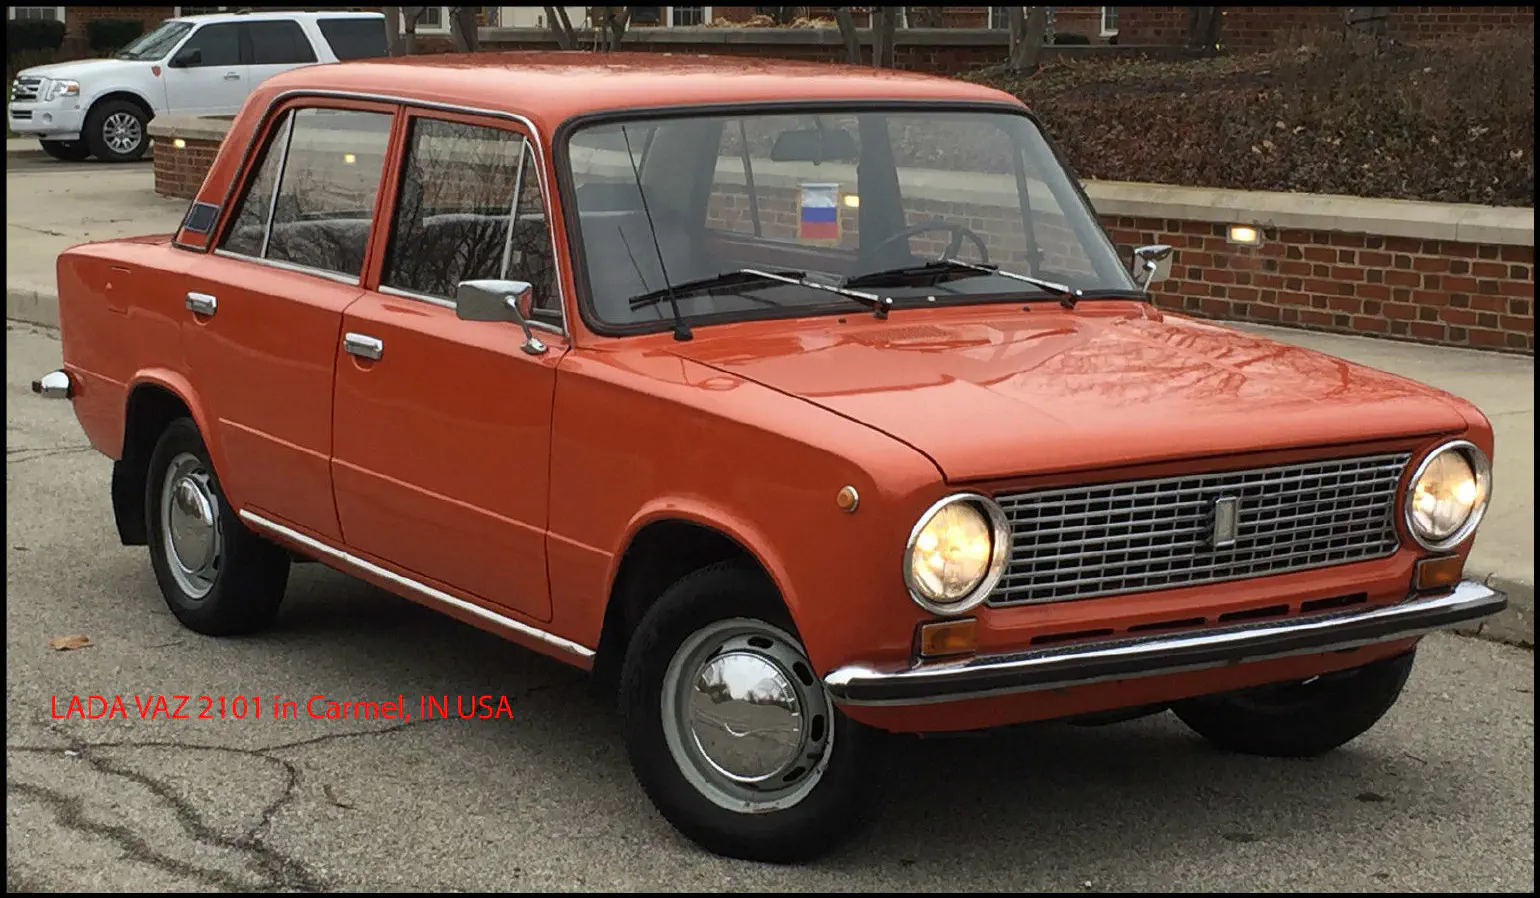 Picture of an old sovietic Landa car